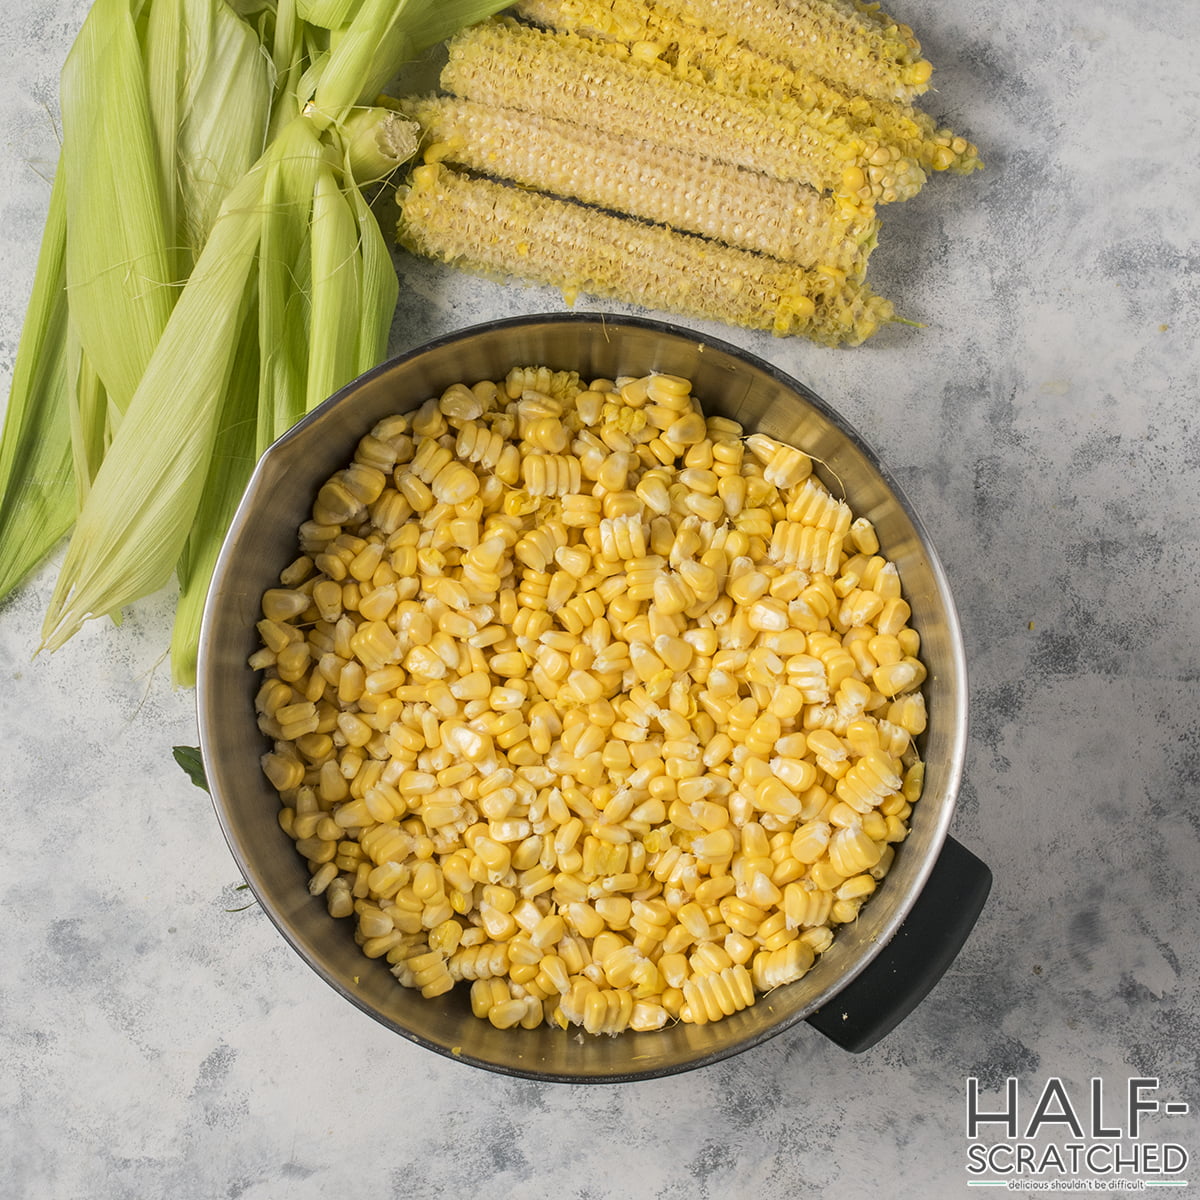 Corn kernels removed from the cob in a large bowl